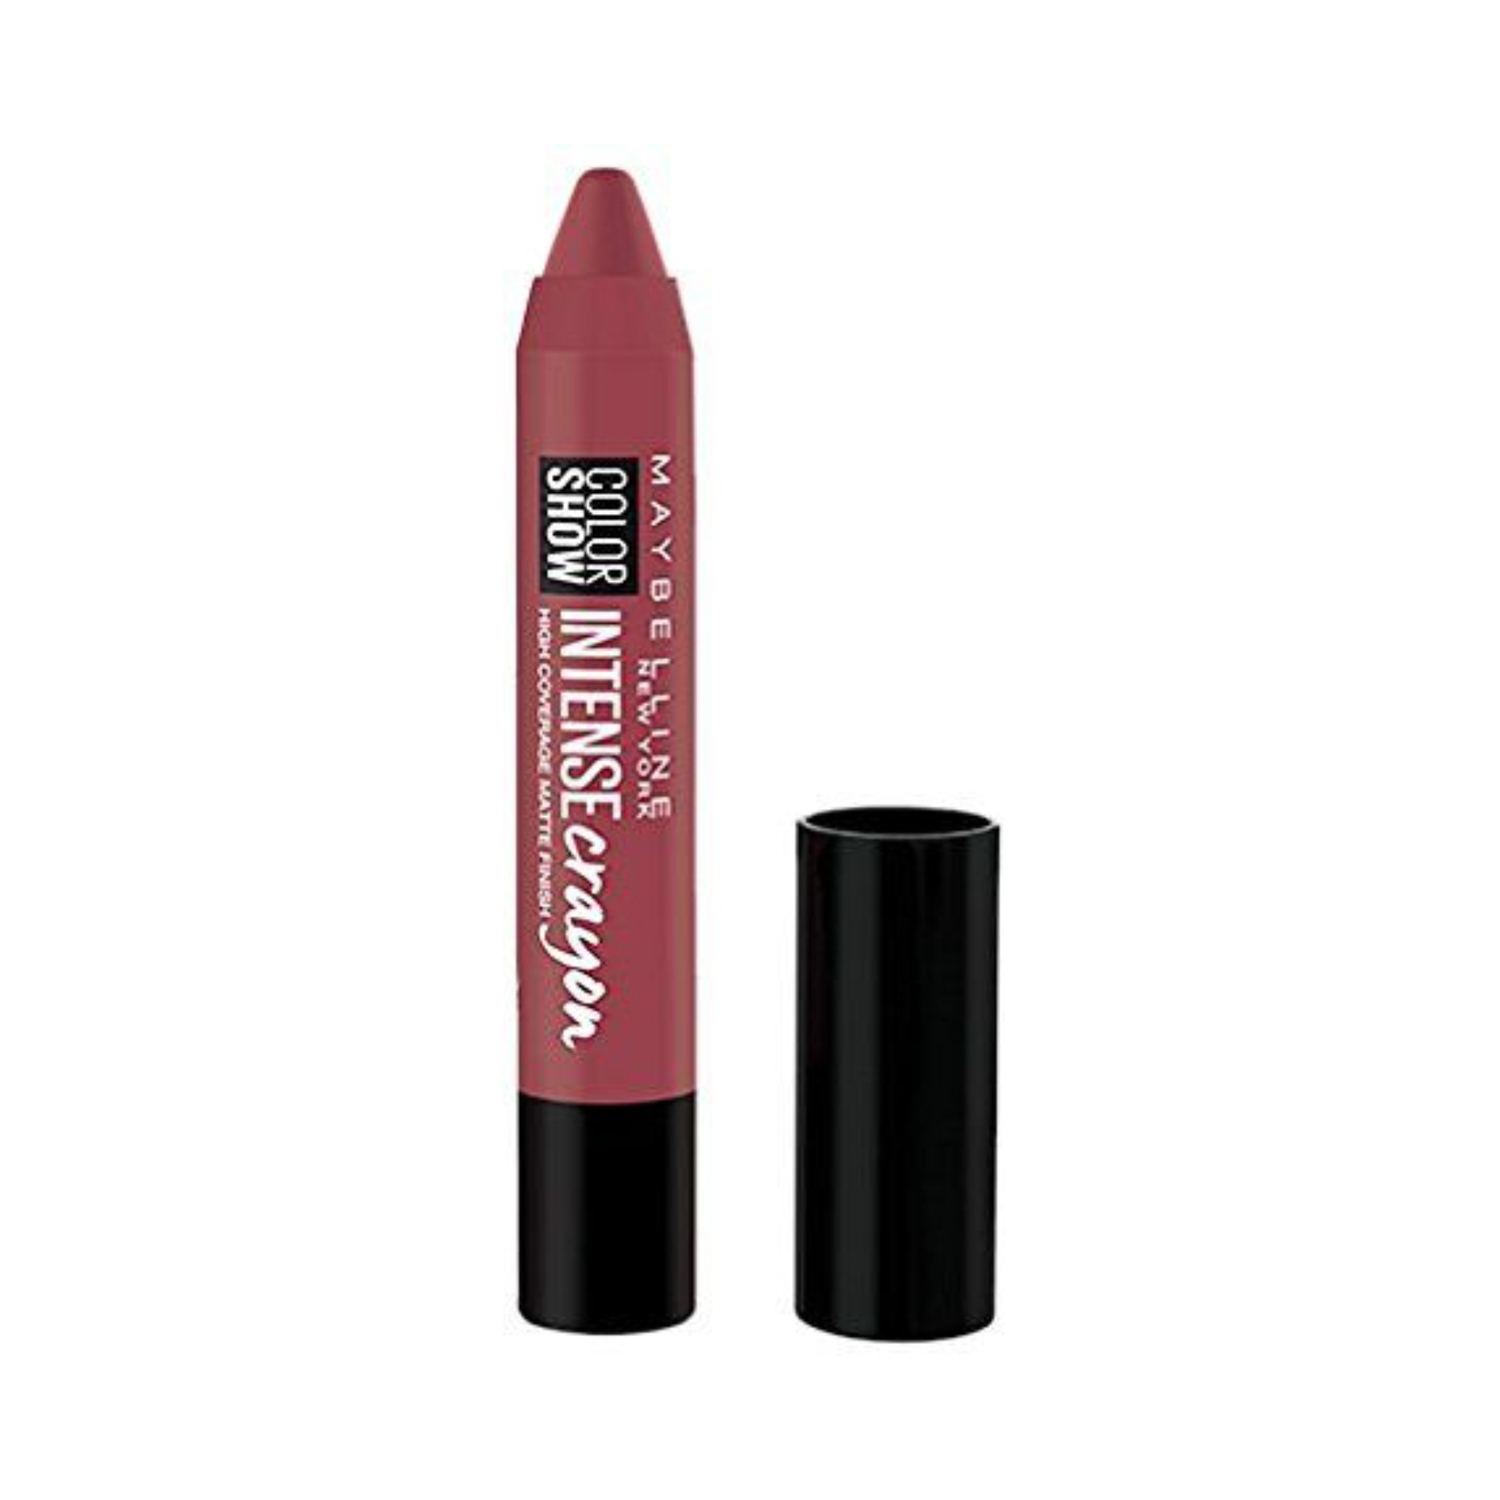 Maybelline New York | Maybelline New York Color Show Intense Lip Crayon SPF 17 - Mystic Mauve (3.5g)